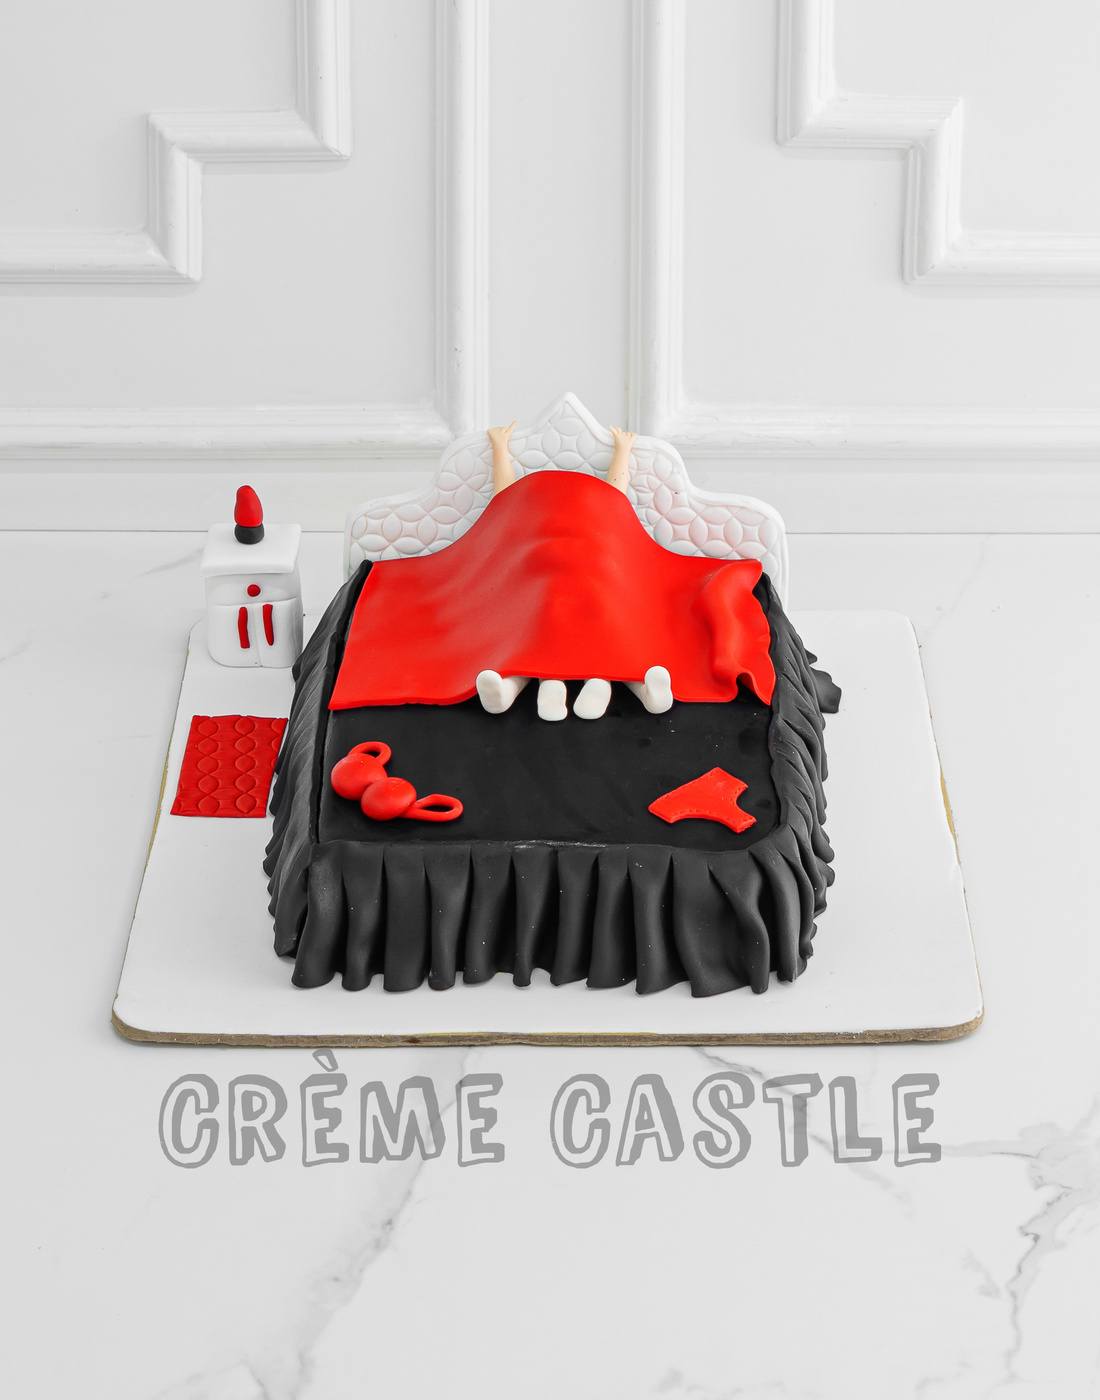 Bachelorette Party Cakes. Naughty Bed Cake Designs. Noida & Gurgaon